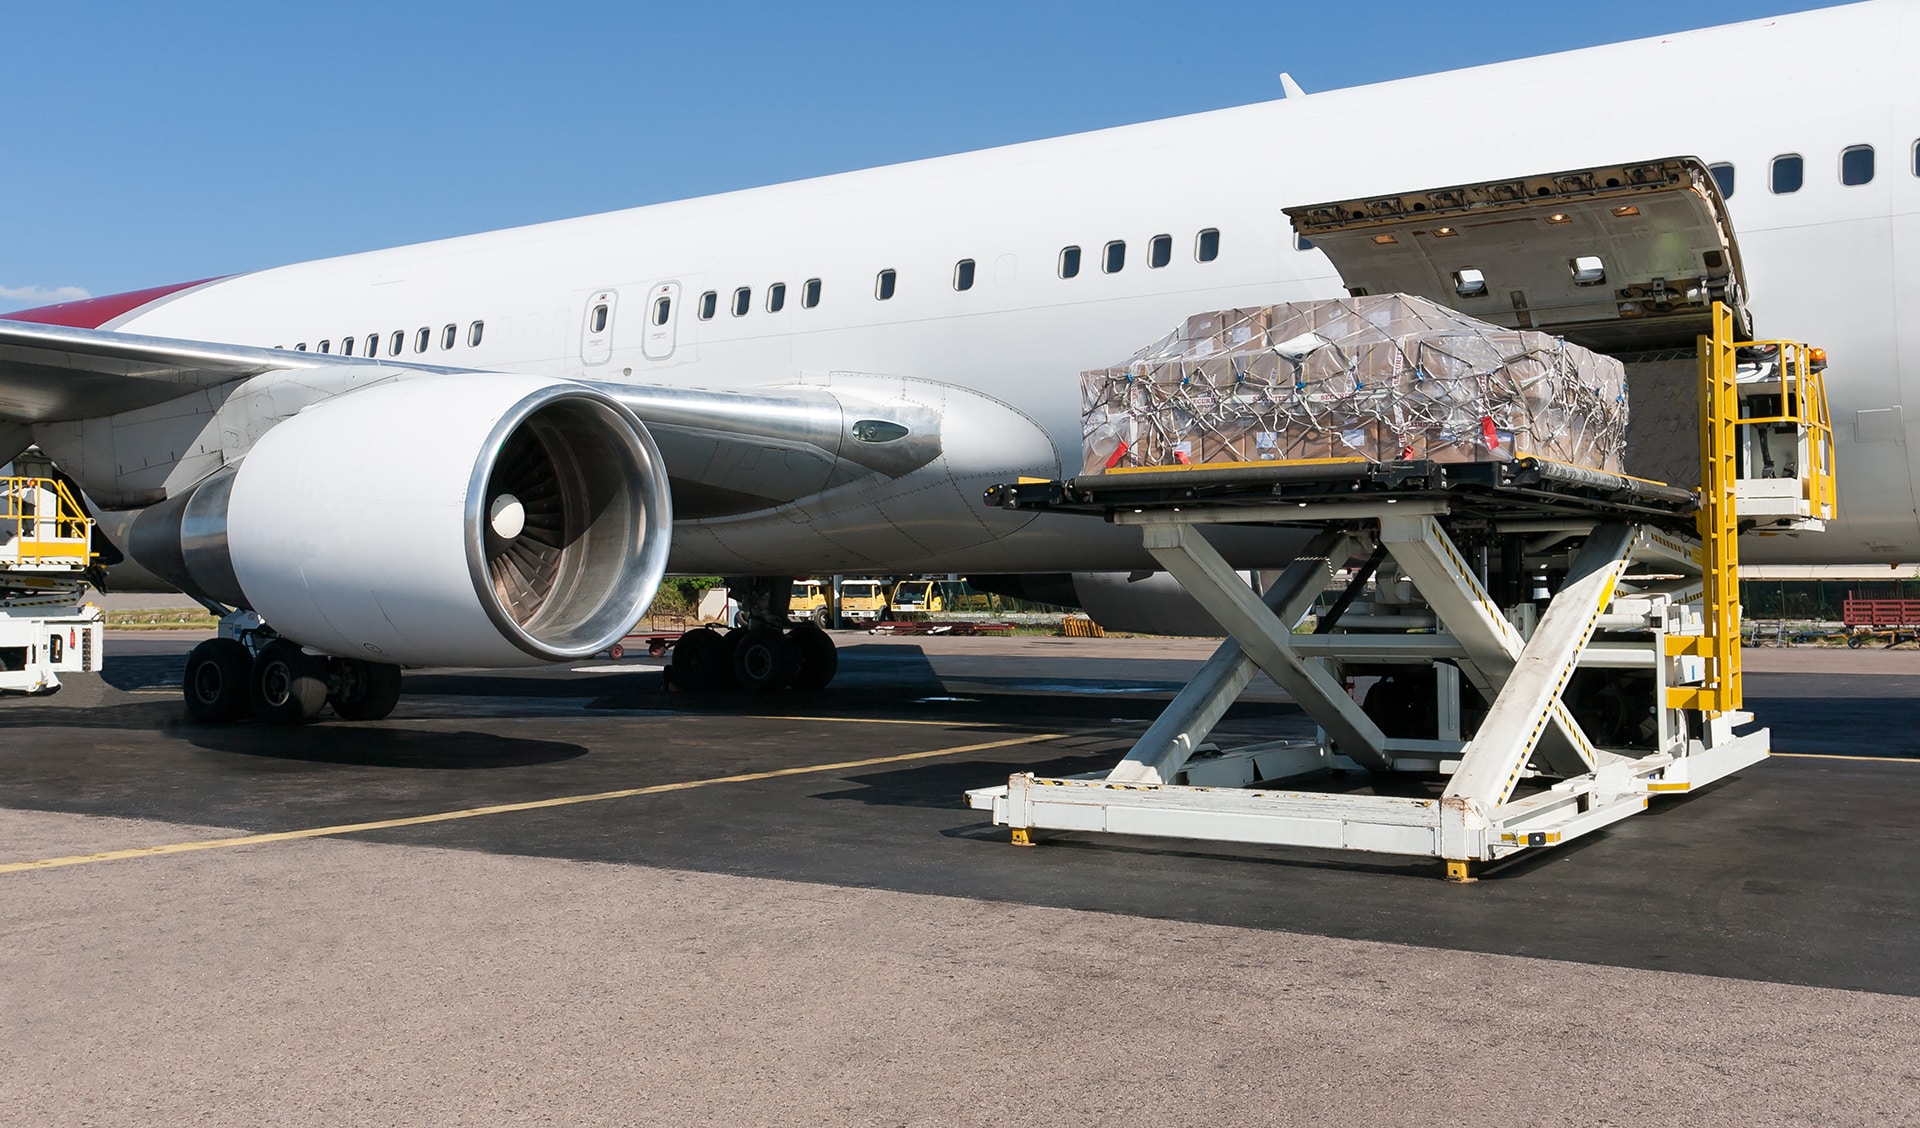 Cargo being loaded onto a plane